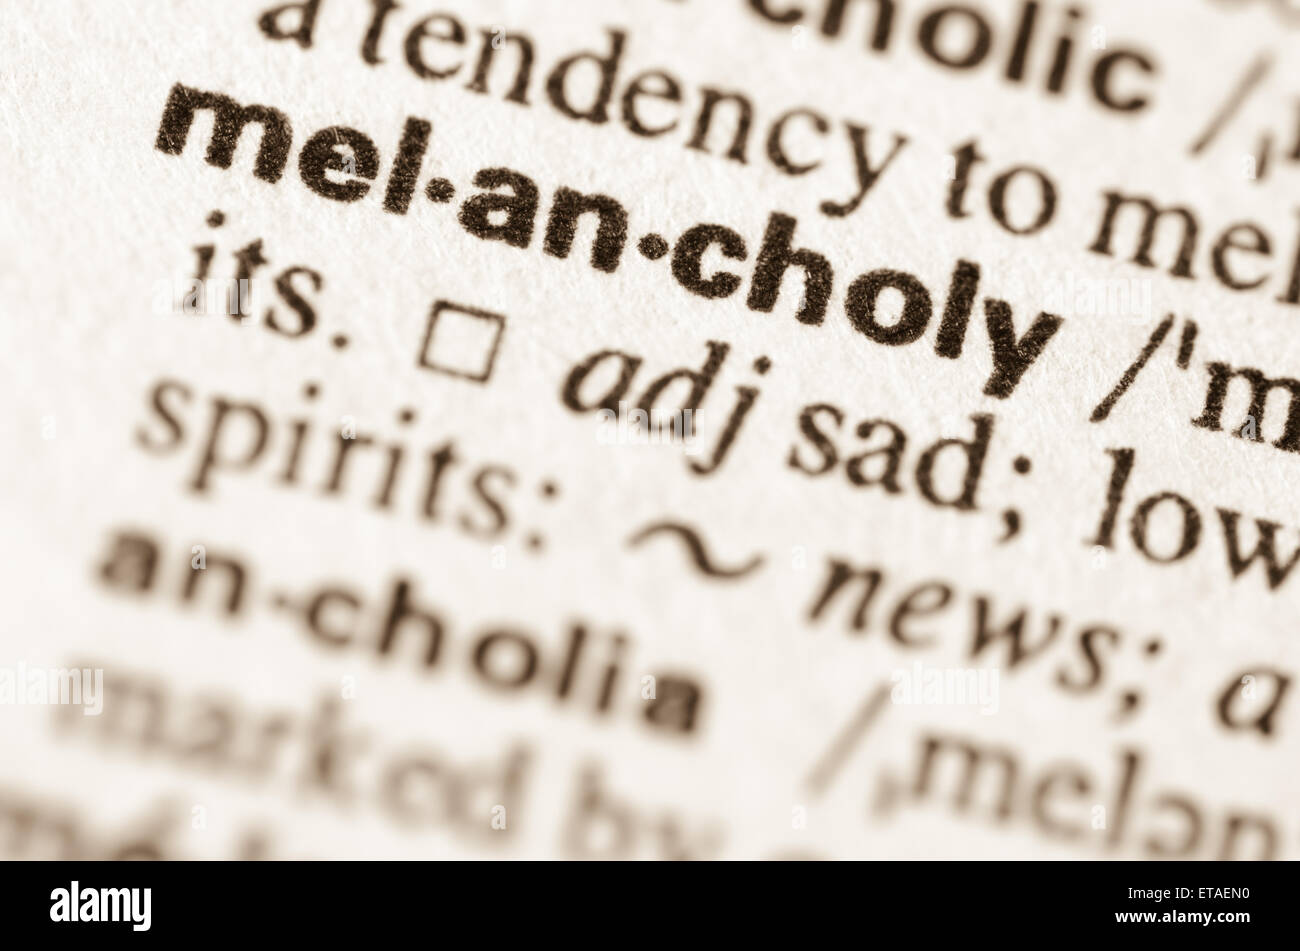 Definition of word melancholy  in dictionary Stock Photo